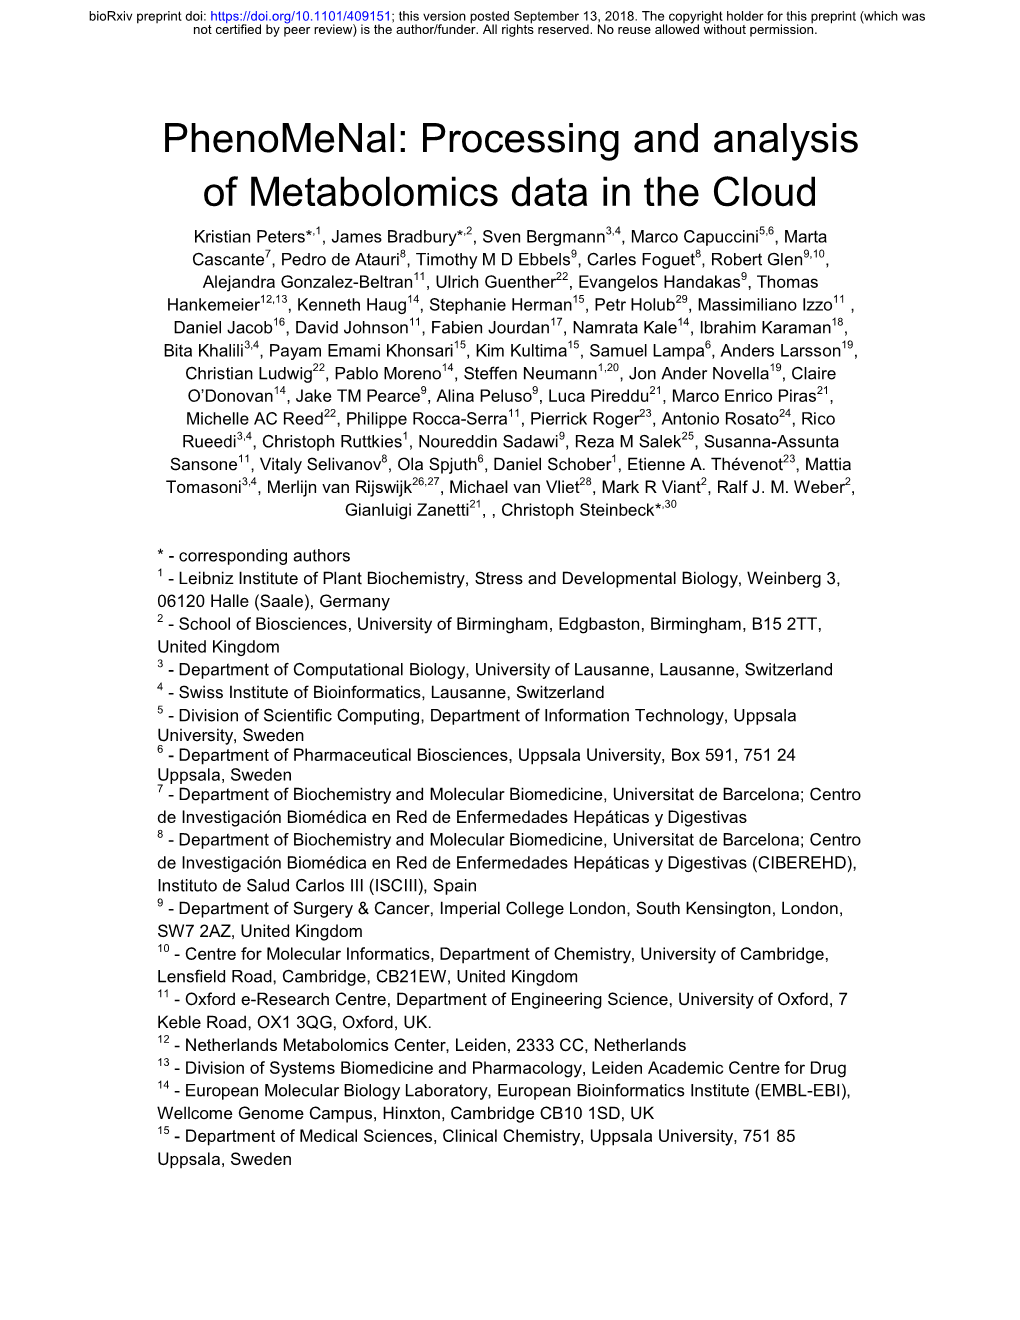 Processing and Analysis of Metabolomics Data in The